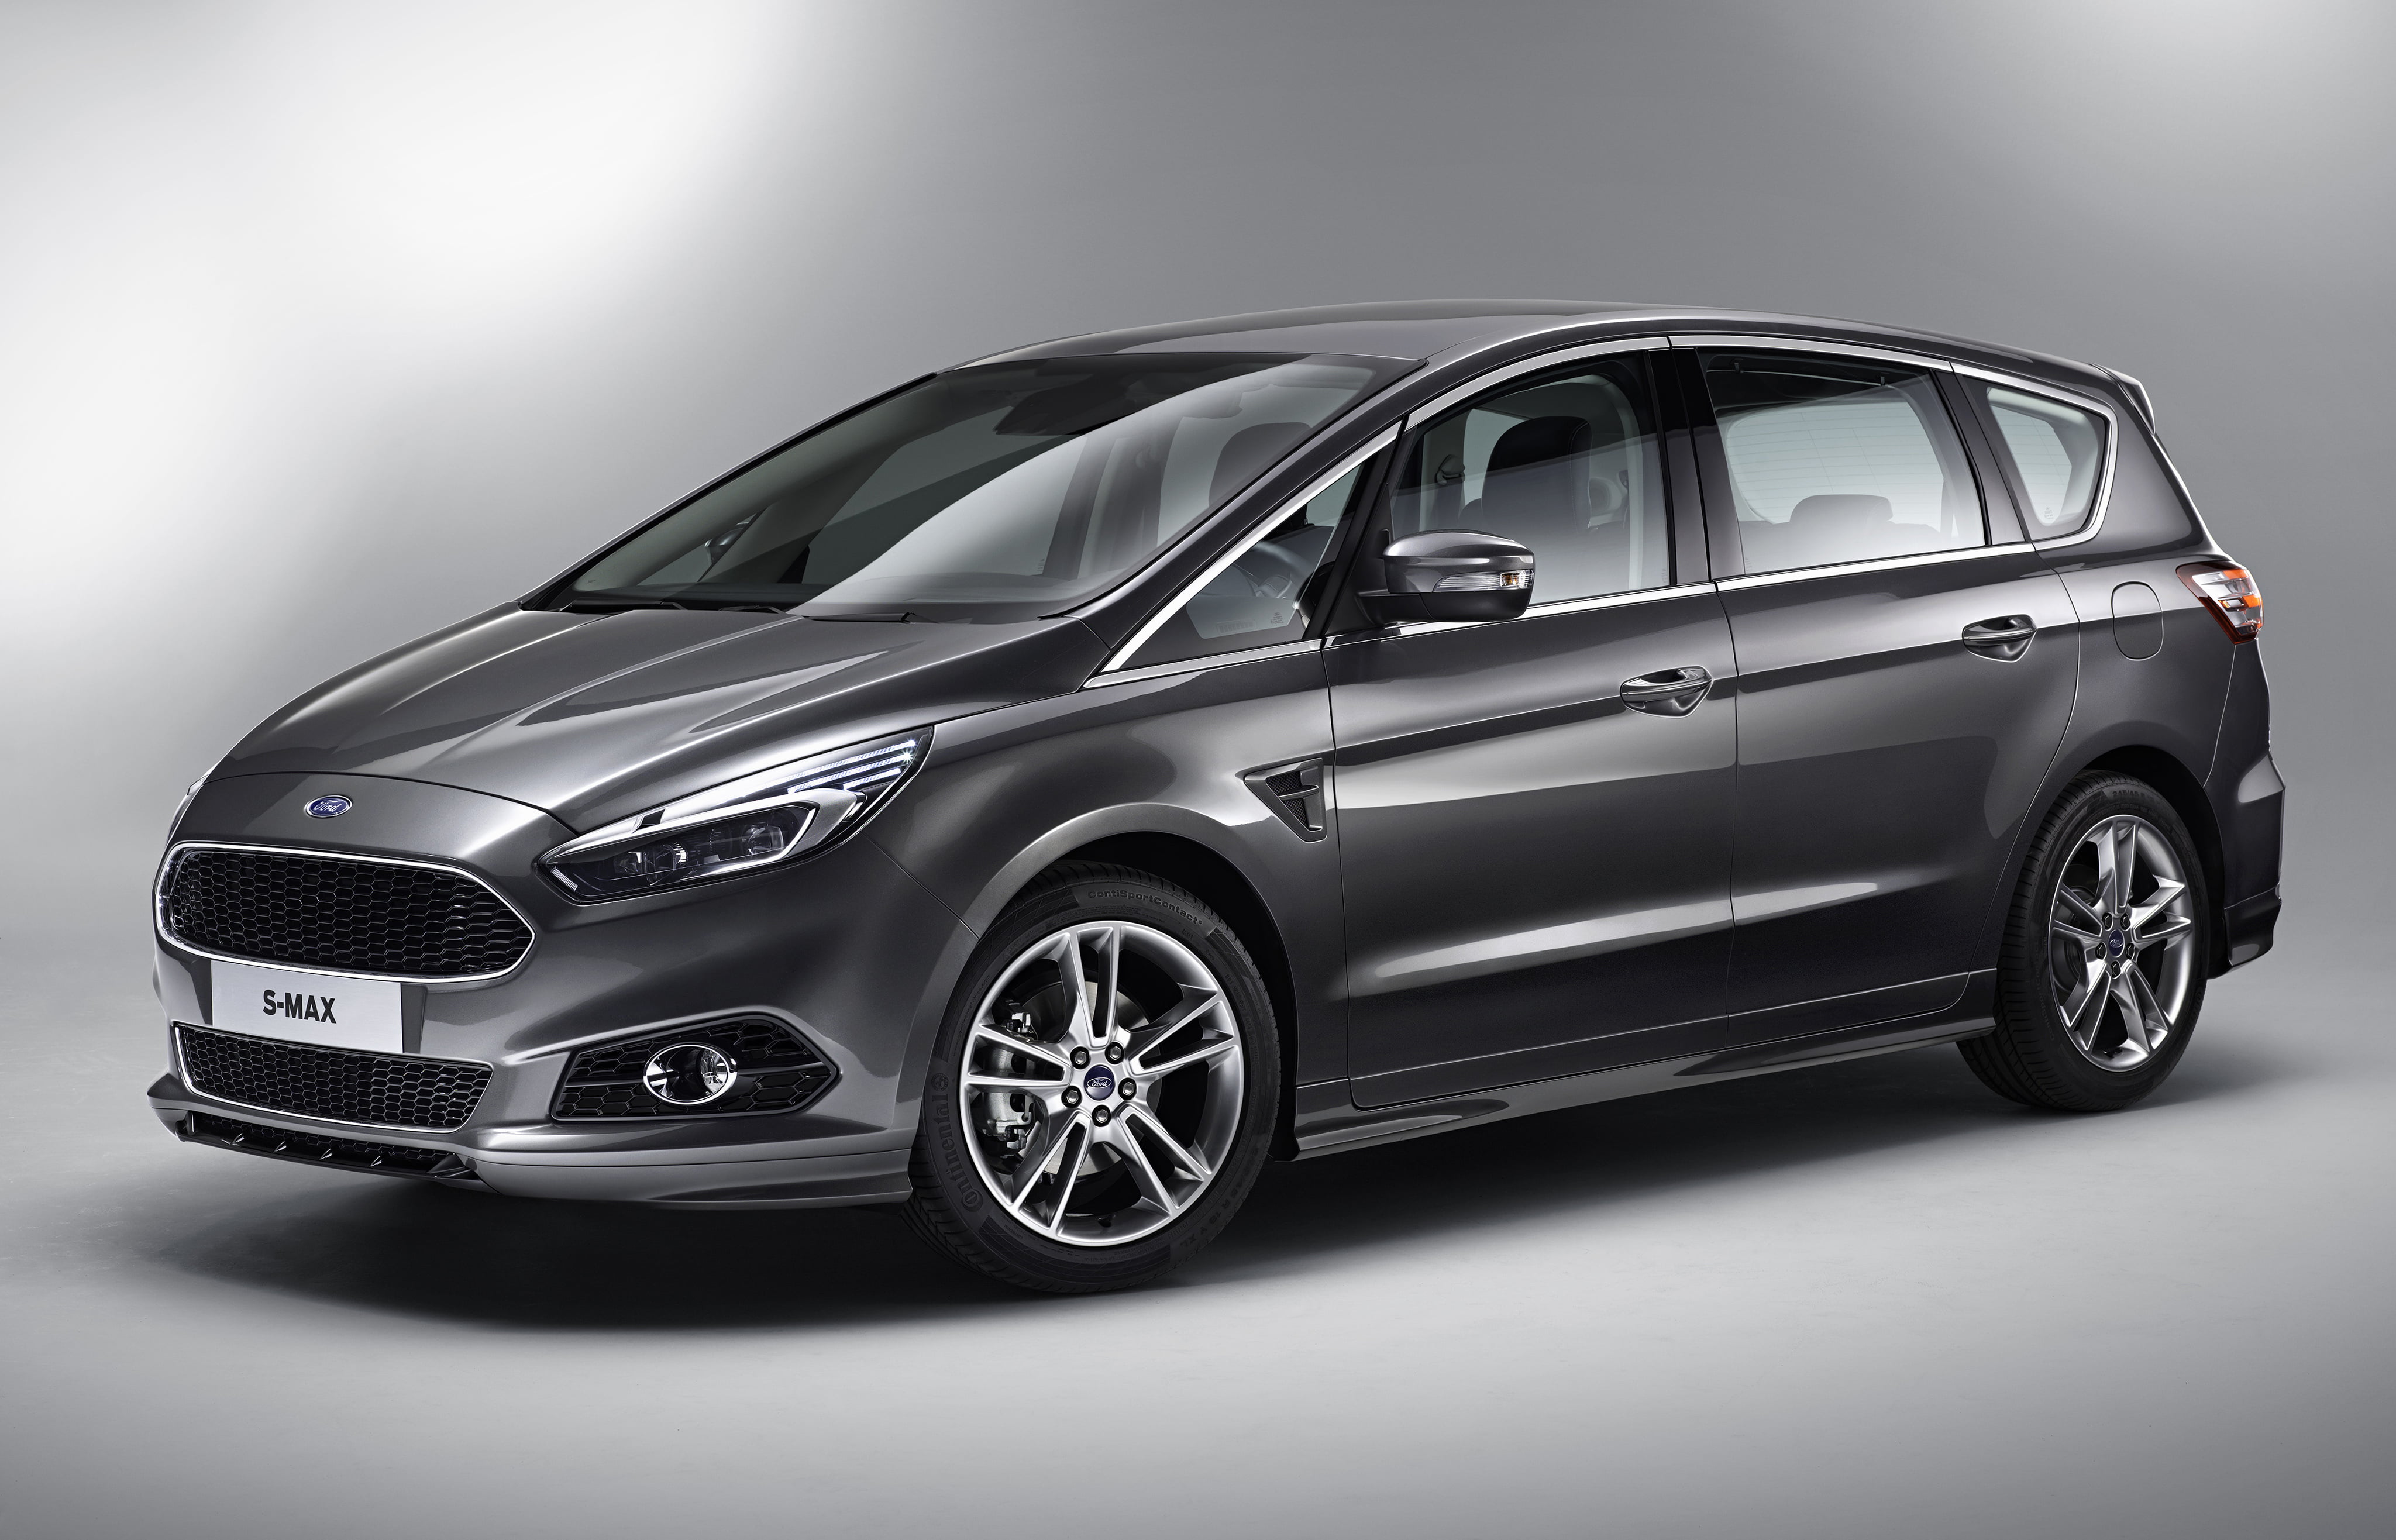 black Ford compact SUV, 2015, S-Max, car, motor vehicle, mode of transportation